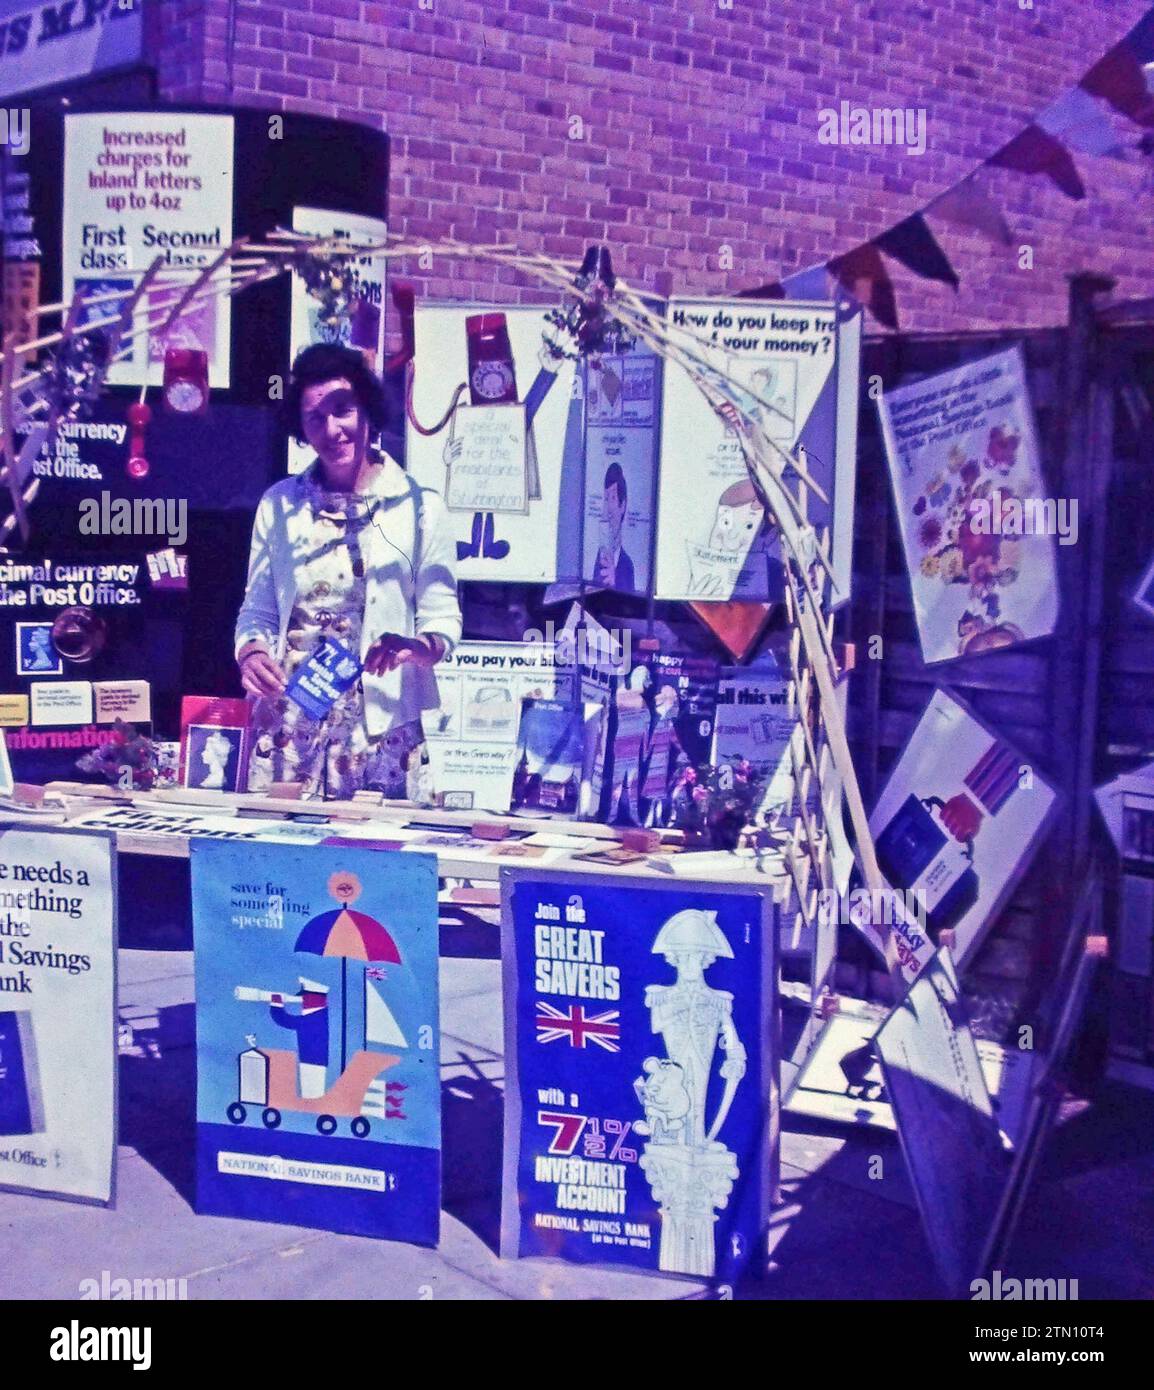 National Savings Bank UK. A woman standing at a stall promoting savings with an interest rate of  7 ½%, and other products with the National Savings Bank in 1970, when interest rates were high. Stock Photo